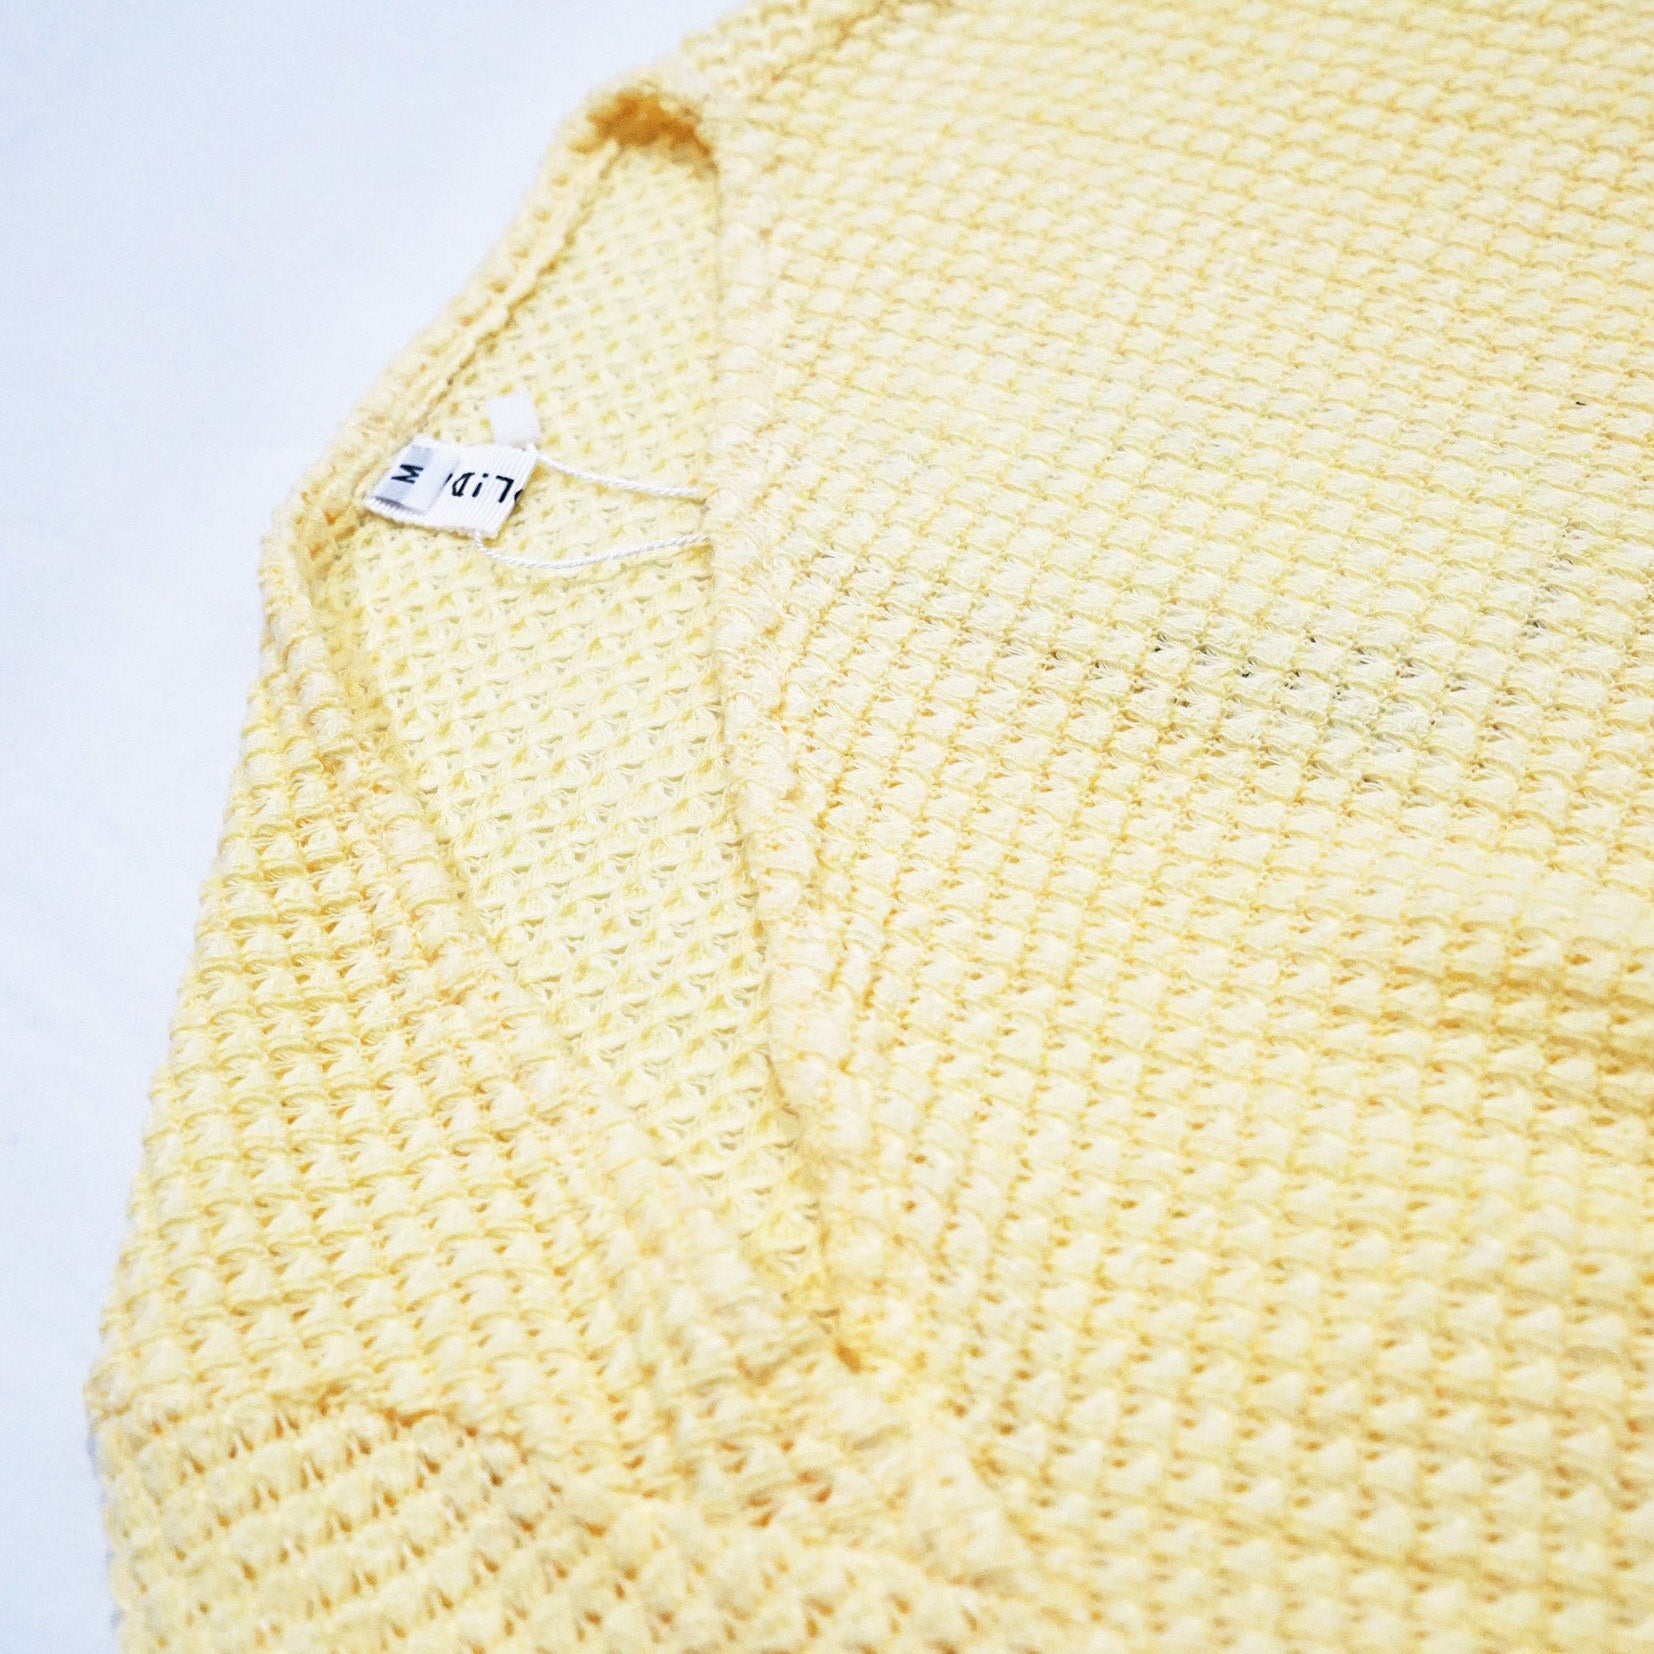 Cut out knitted bodysuit in yellow